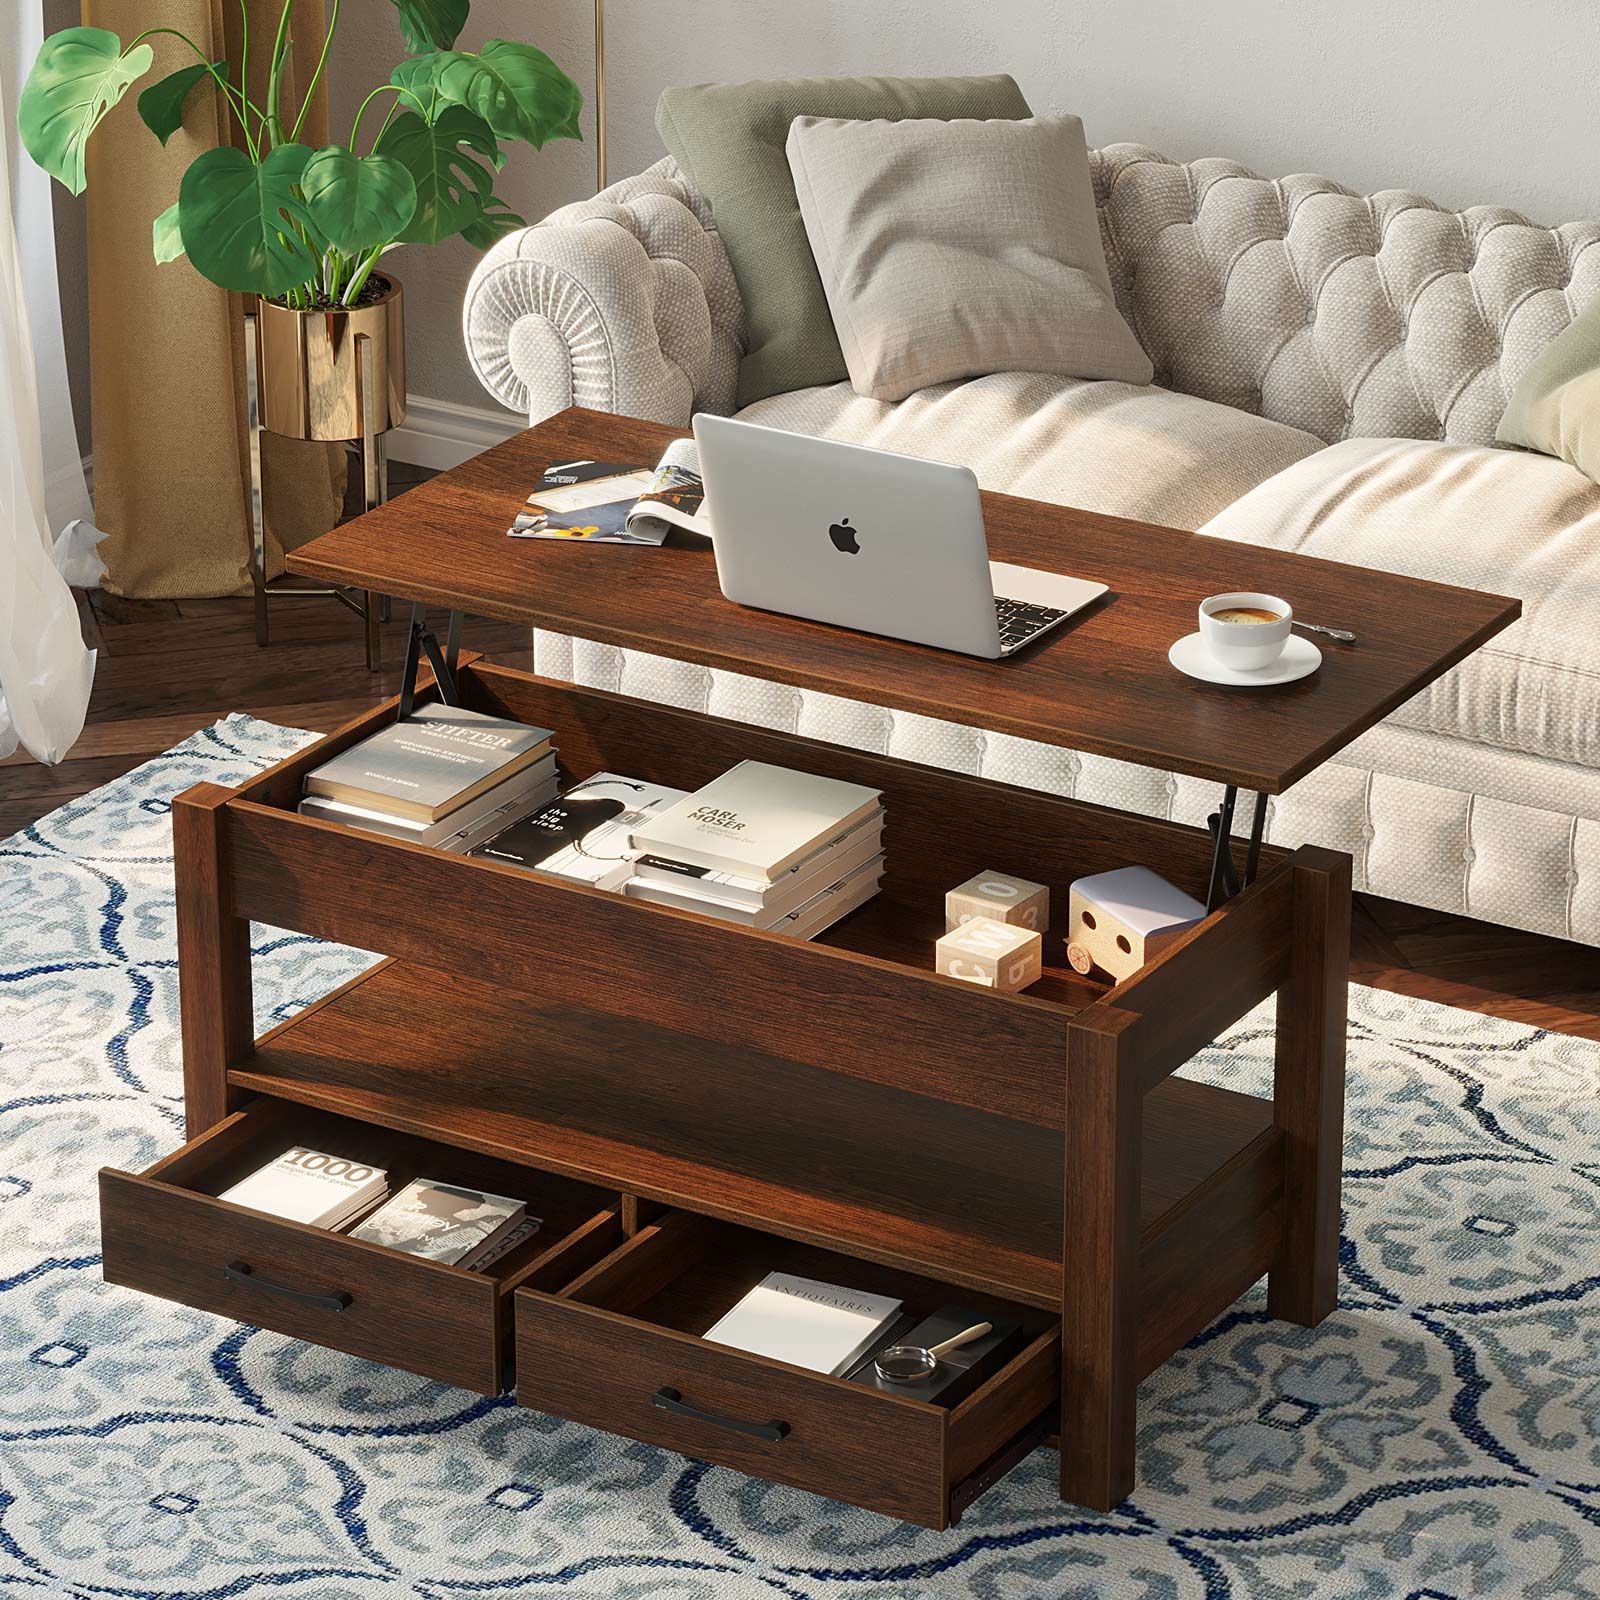 Rolanstar Coffee Table, Lift Top Coffee Table With Drawers And Hidden With Lift Top Coffee Tables With Storage Drawers (Gallery 13 of 20)